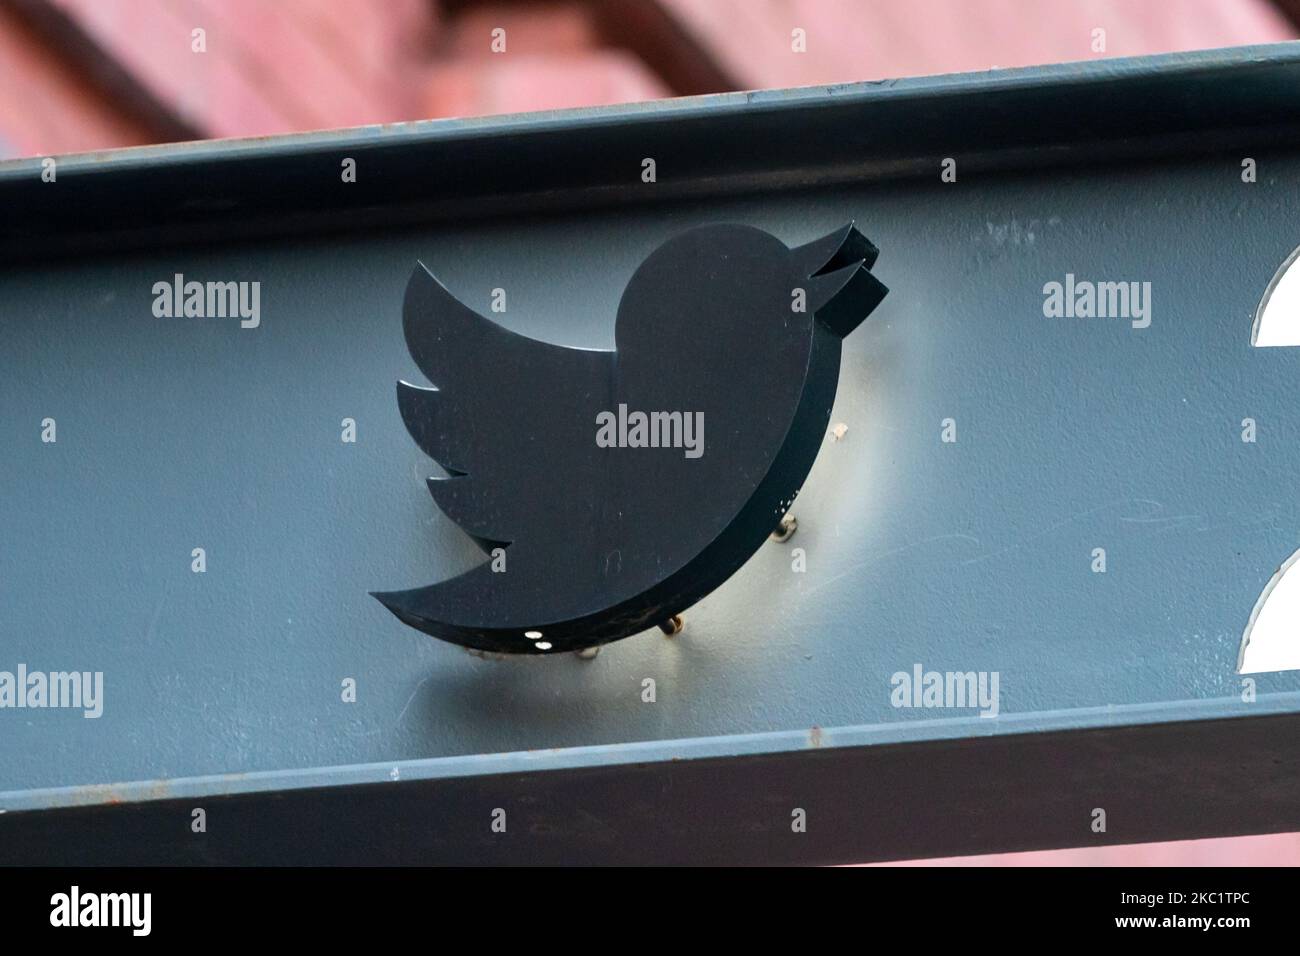 A view of the Twitter logo at their New York City headquarters on October 14, 2020. Facebook And Twitter Limit Sharing New York Post Story About Joe Biden, report says. (Photo by John Nacion/NurPhoto) Stock Photo